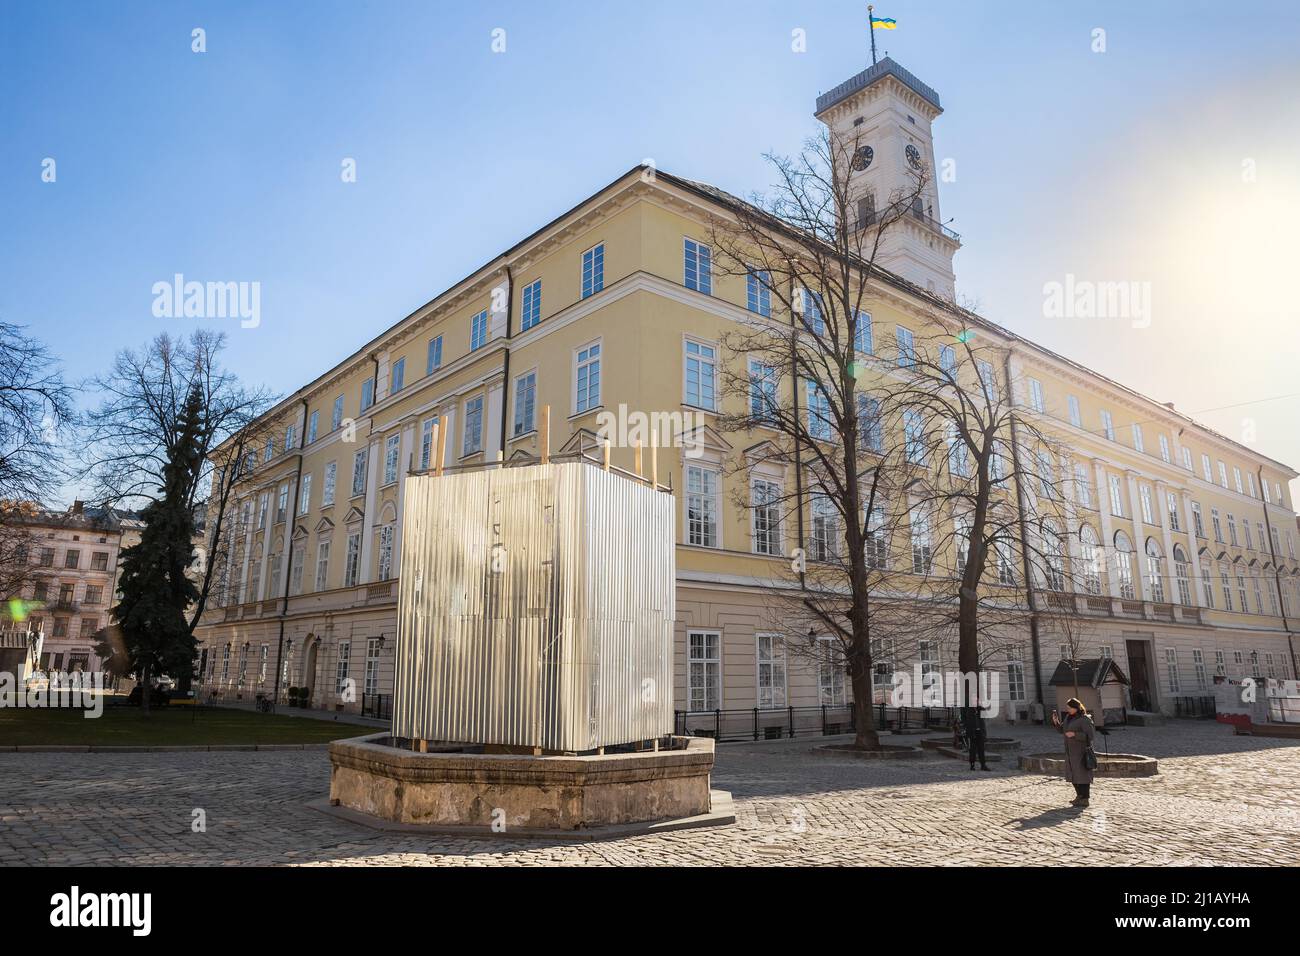 LVIV, UKRAINE - March 17, 2022: One of the statues near the City Hall in Lviv is shielded to prevent damaging during possible bombardment. Russia inva Stock Photo